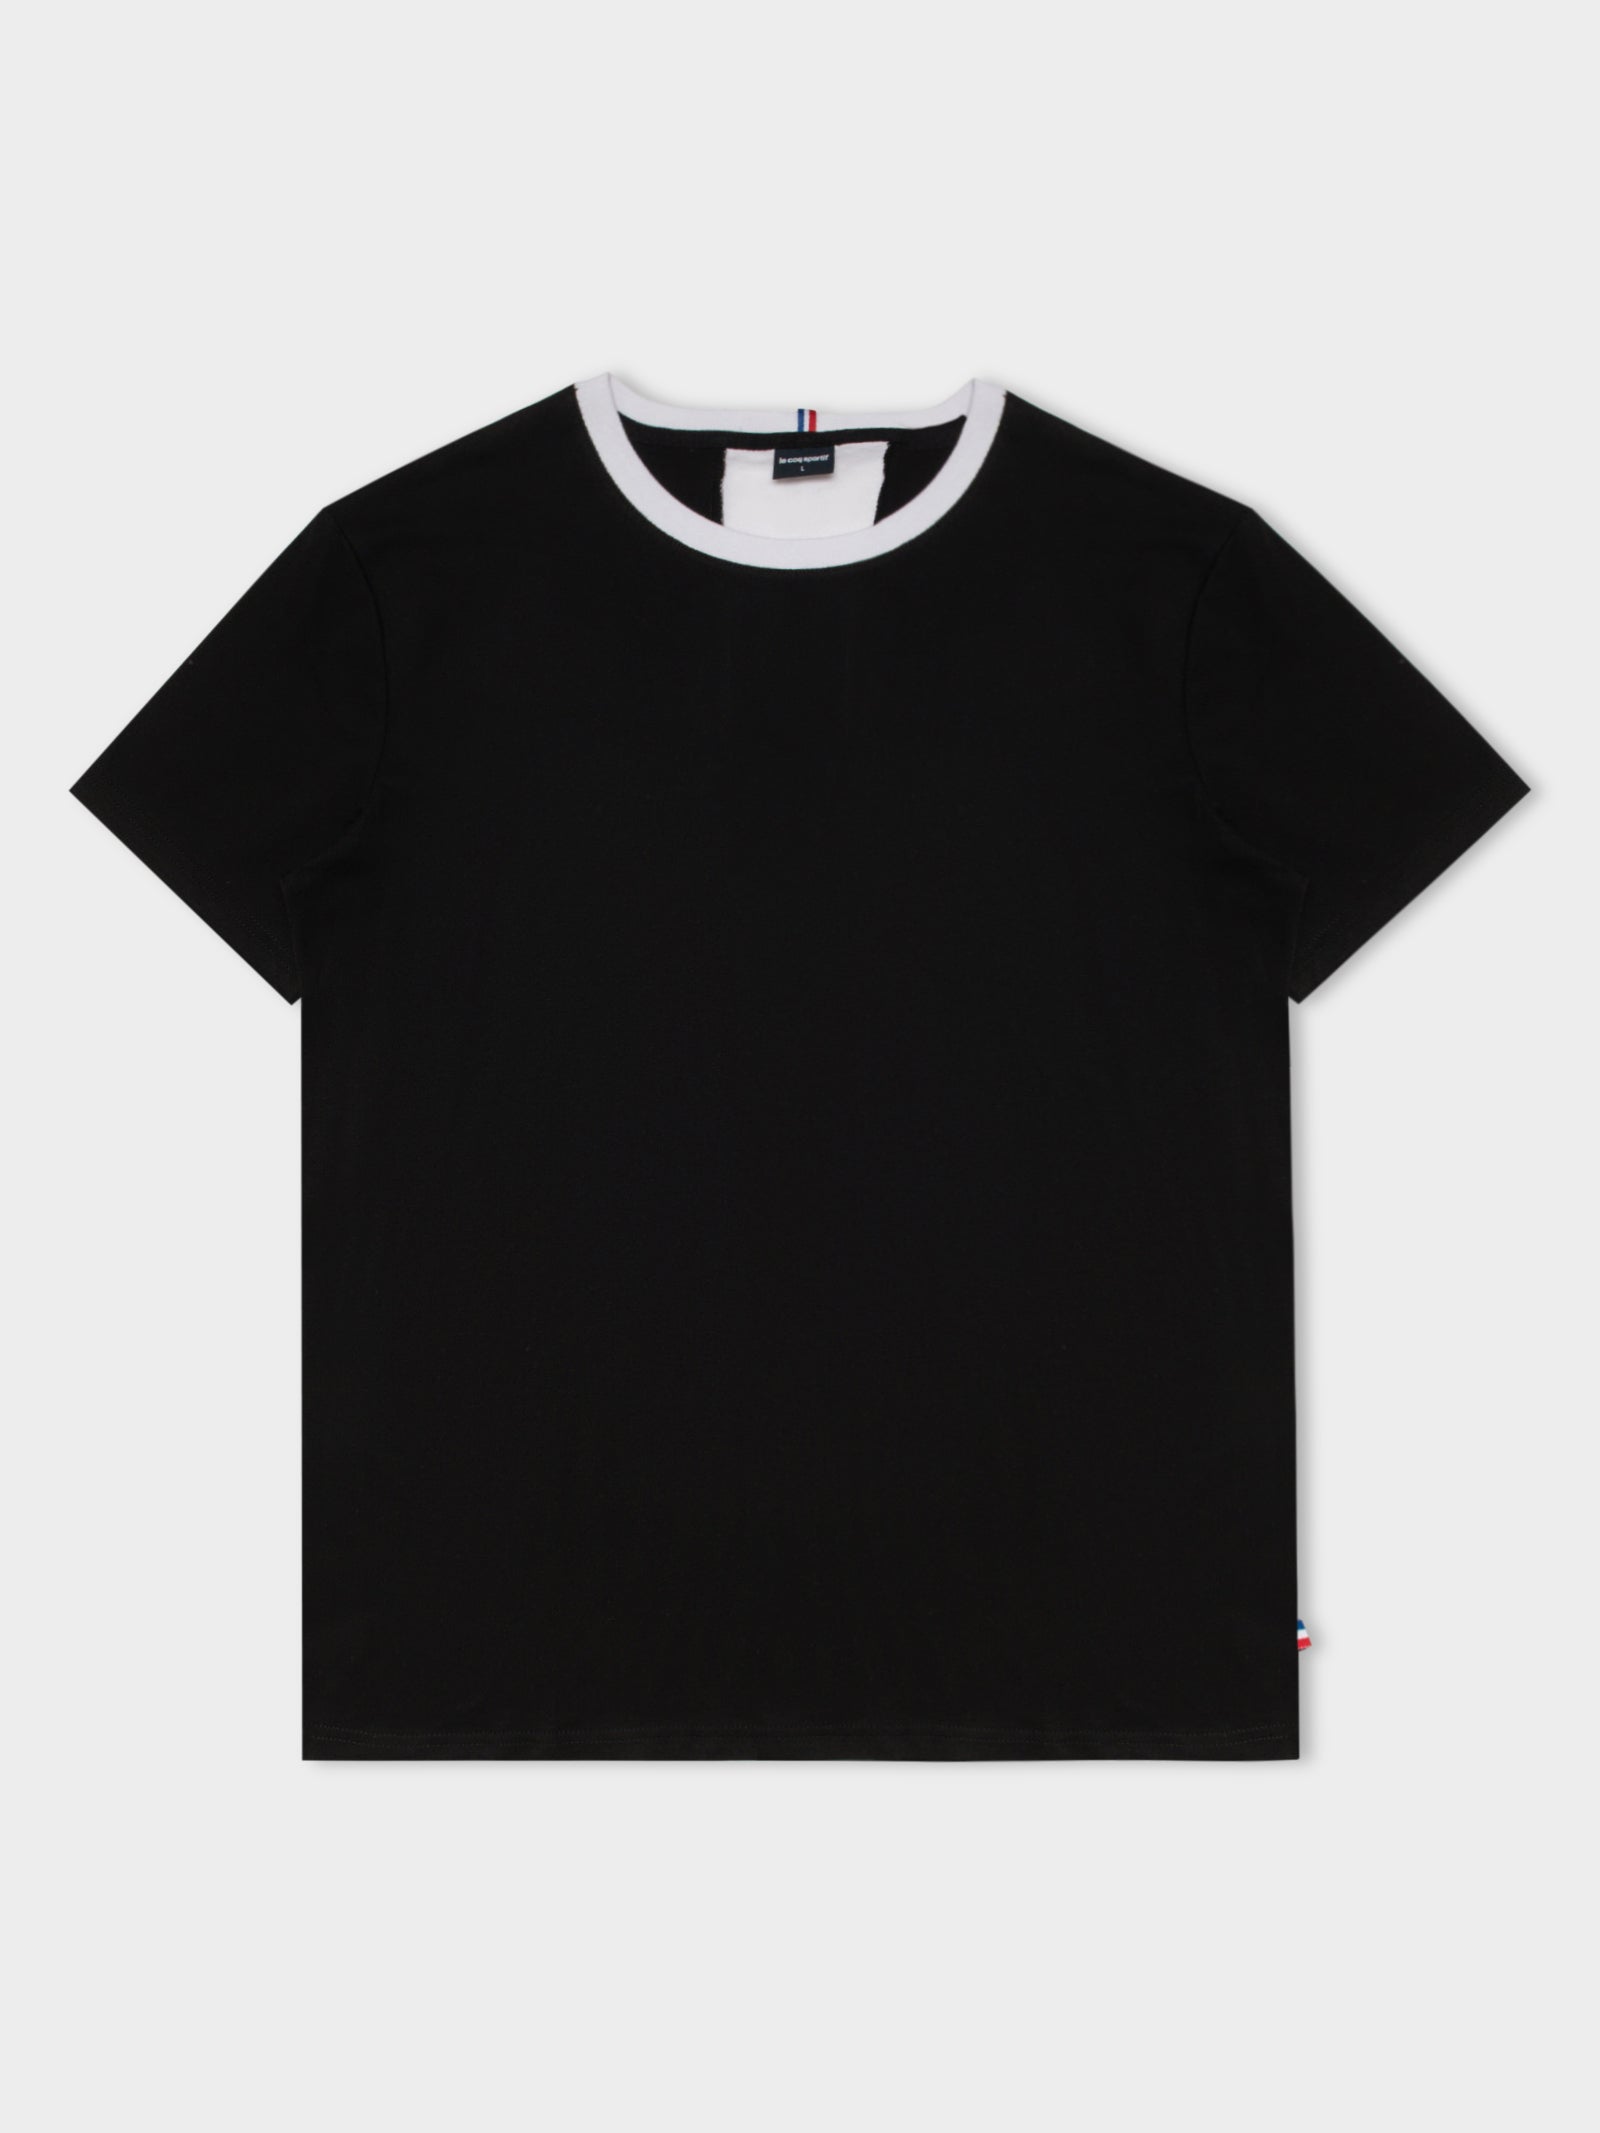 Musette T-Shirt in Black - Glue Store